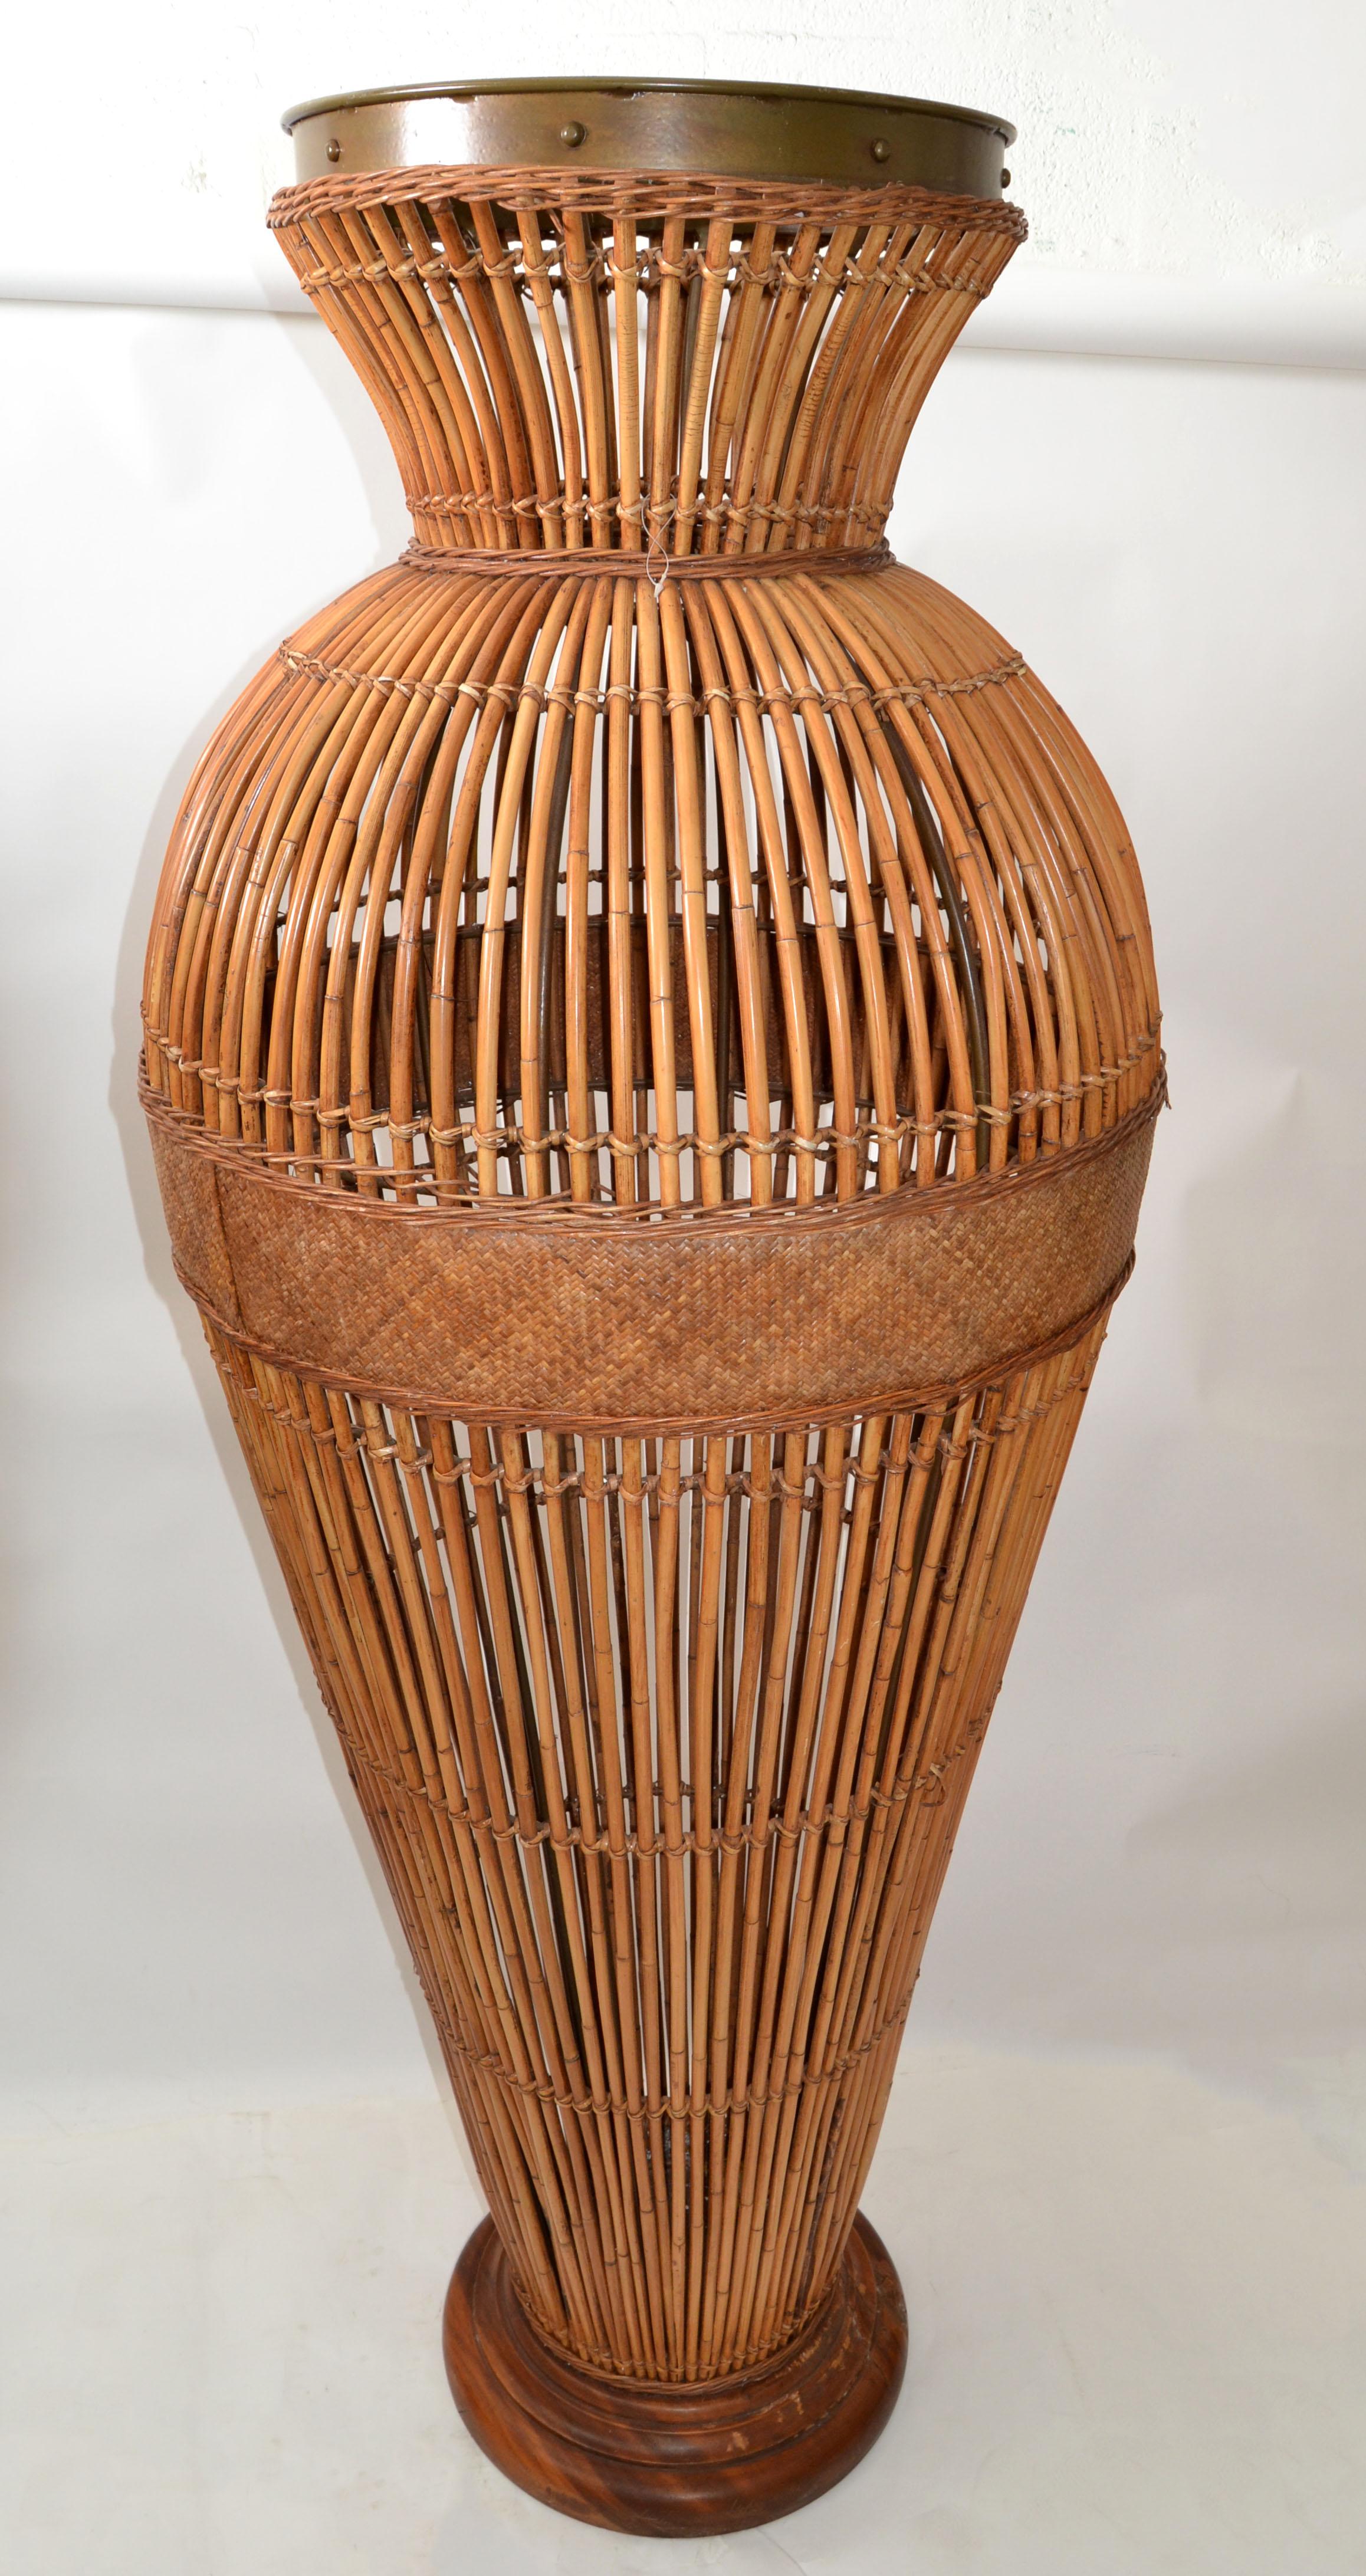 Monumental 6 Feet Mid-Century Modern Handcrafted Bamboo Brass & Cane Floor Vase For Sale 9